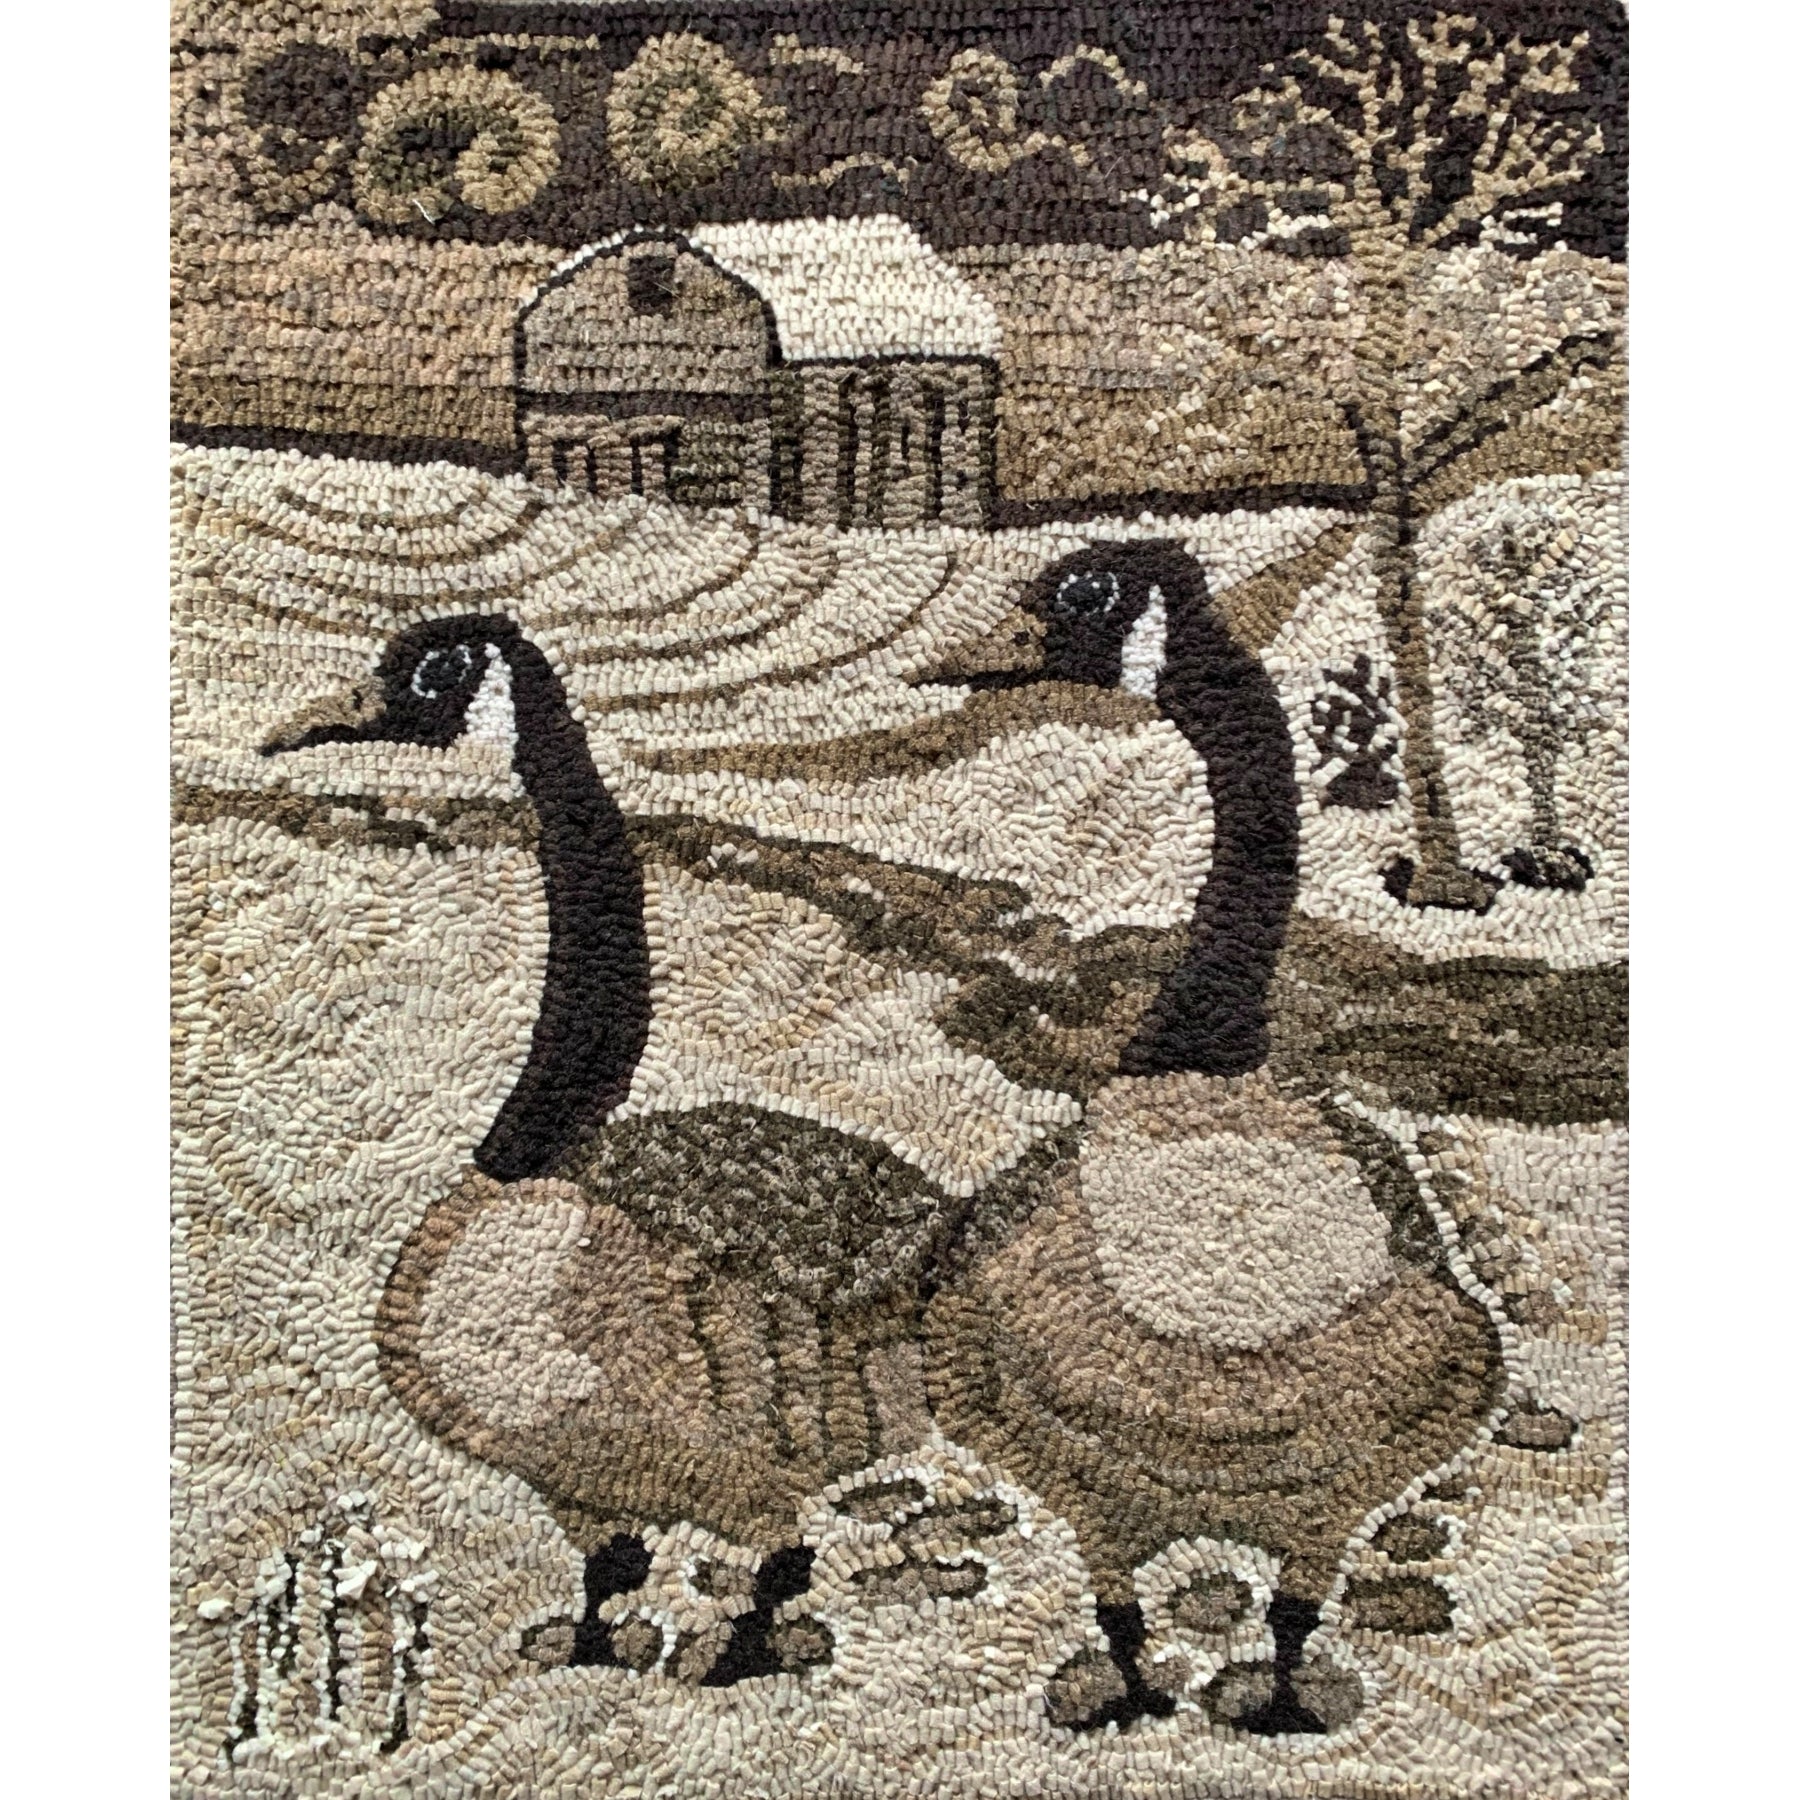 Canadian Snow Geese, rug hooked by Joan Bollaert